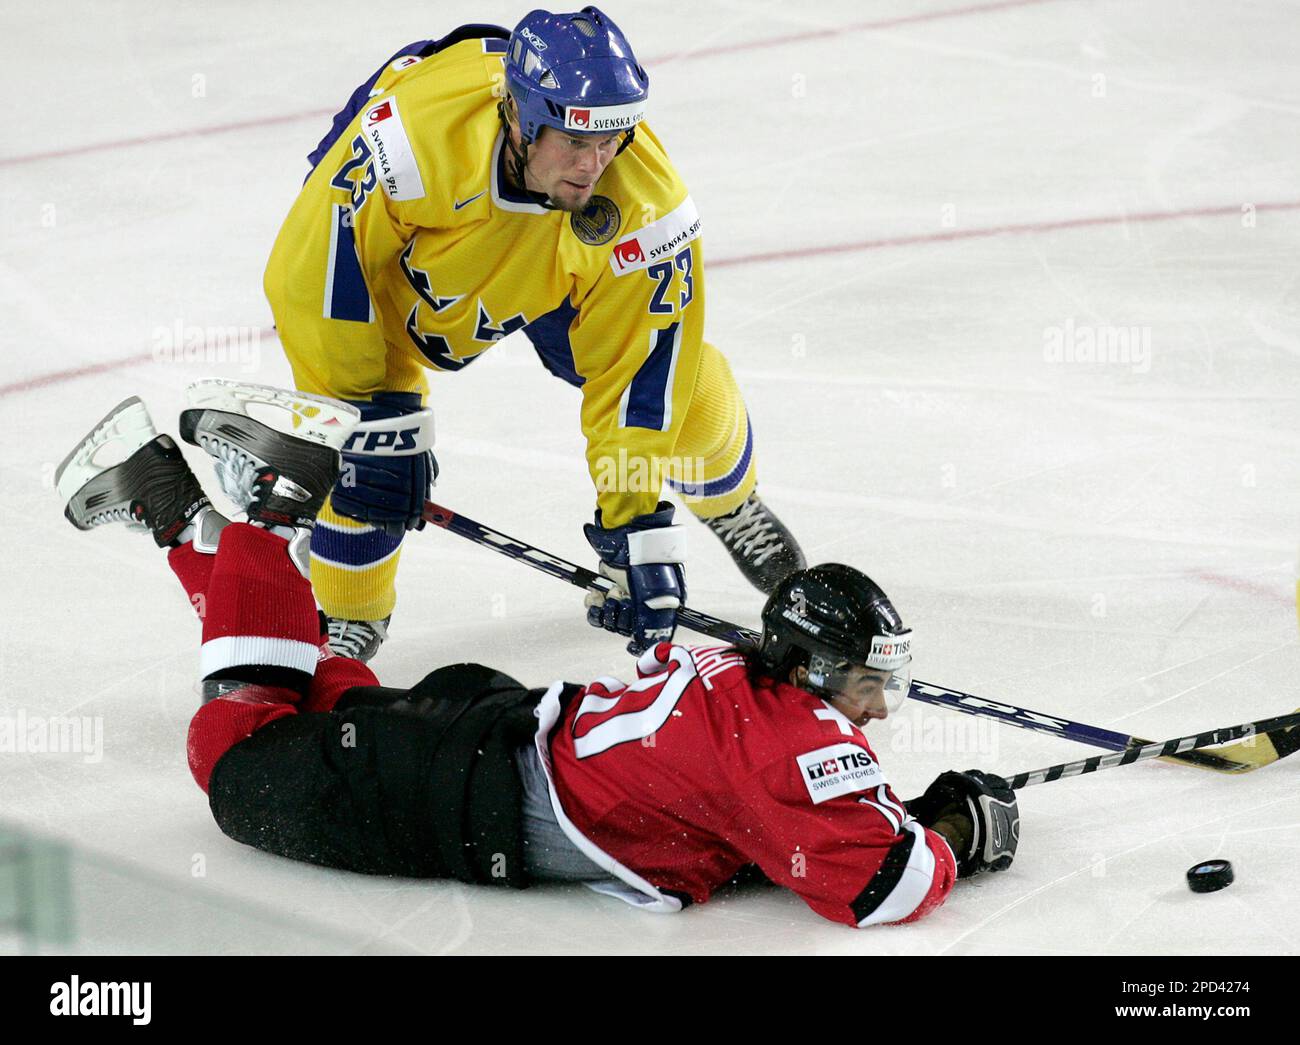 Swedens Ronnie Sundin, top, holds Switzerlands Andreas Ambuhl on the ice during their IIHF Ice Hockey World championship match in Latvian capital Riga Wednesday, May 10, 2006